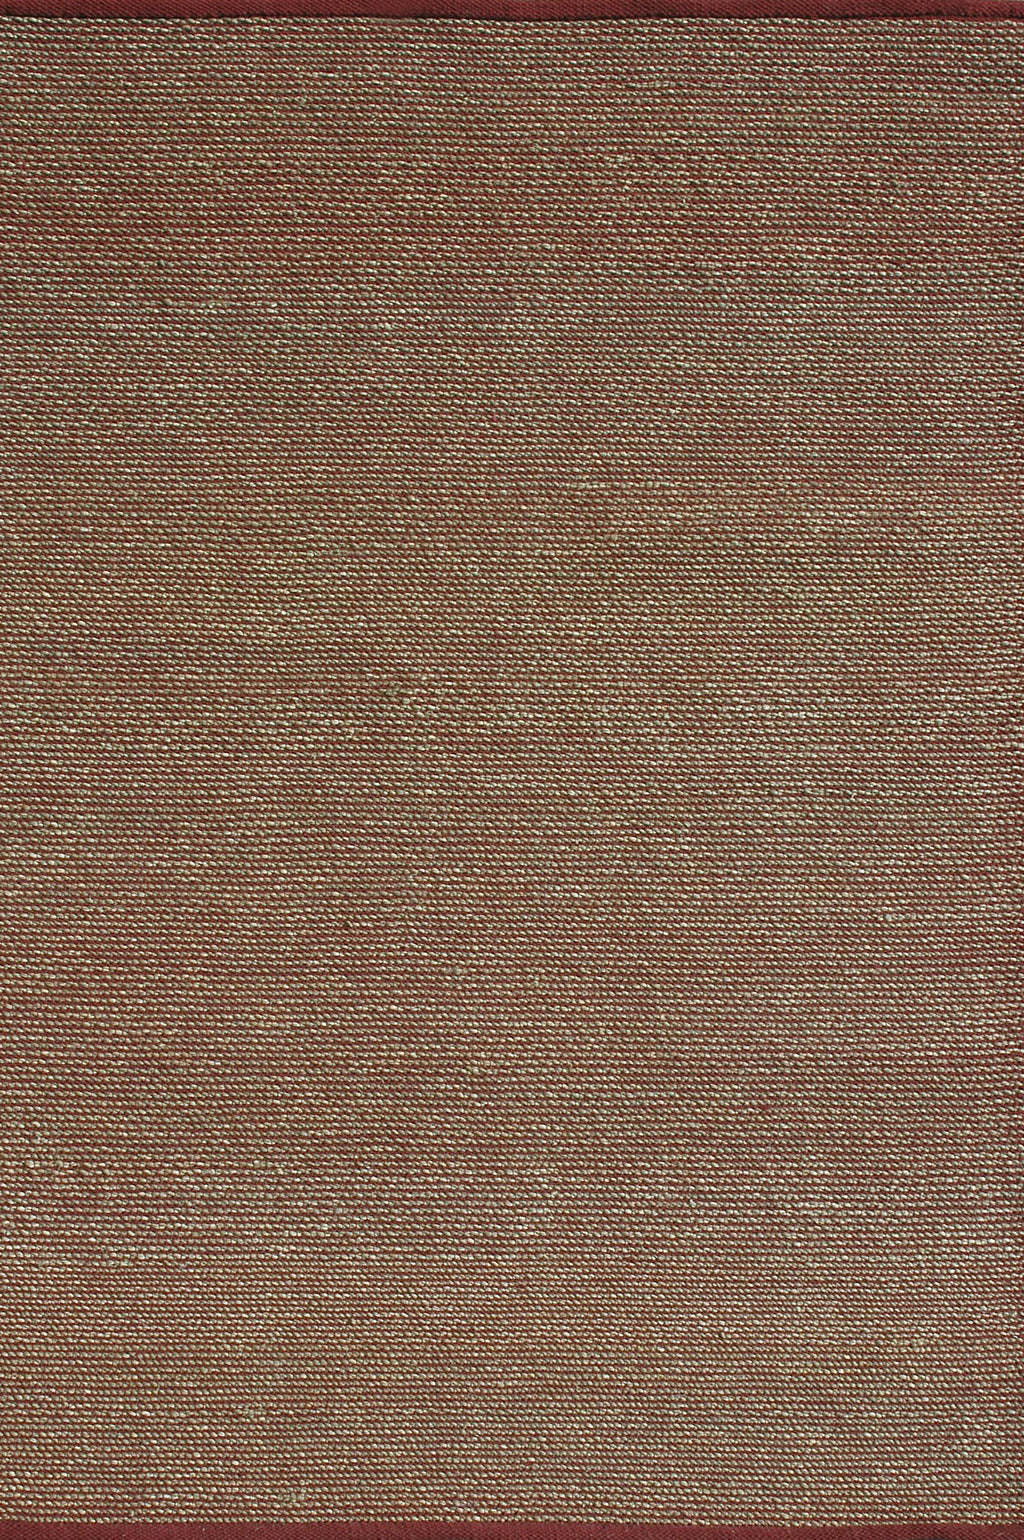 Loloi Green Valley GV-01 Red Area Rug main image